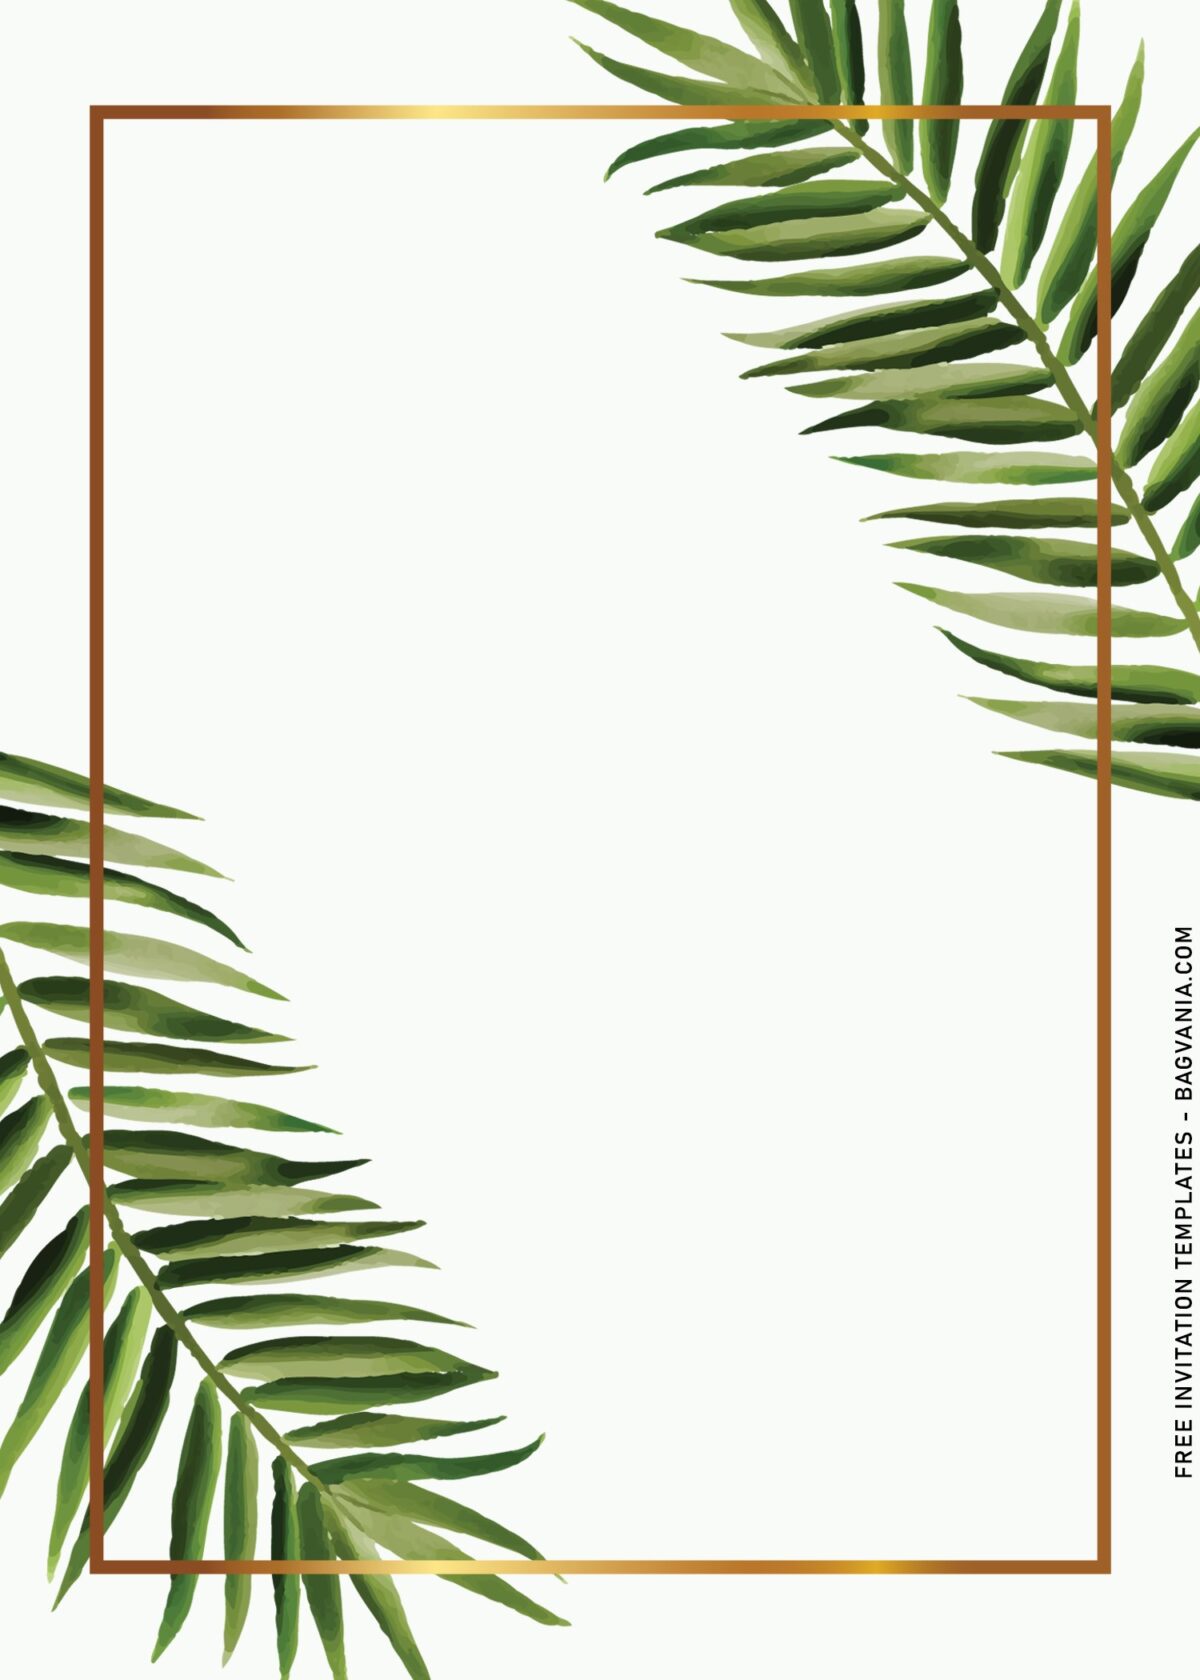 7+ Greenery And Gold Frame Invitation Templates with realistic palm leaves